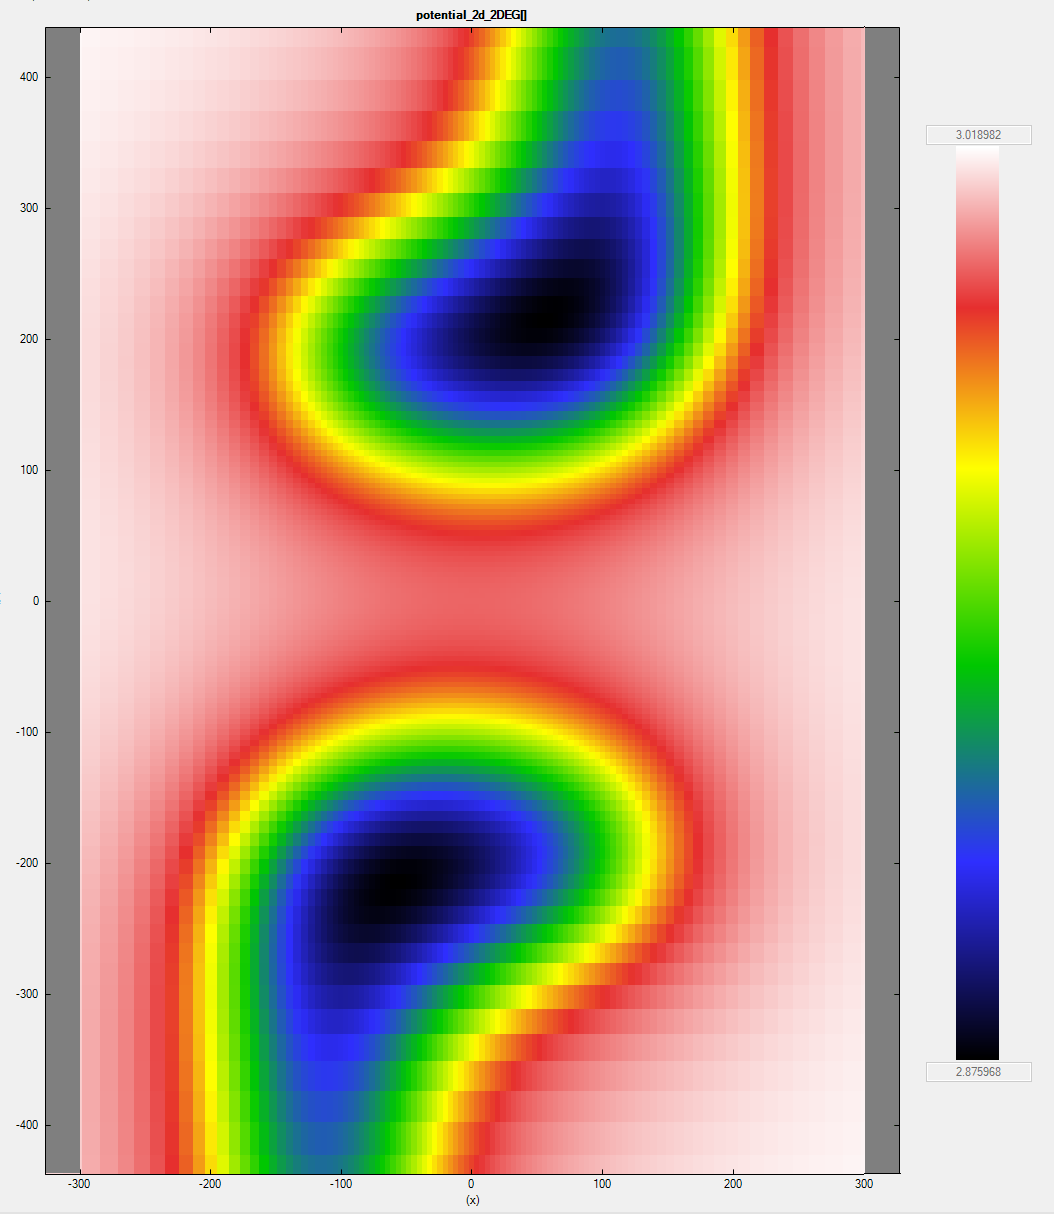 image of the potential in the 2DEG region used in the simulation